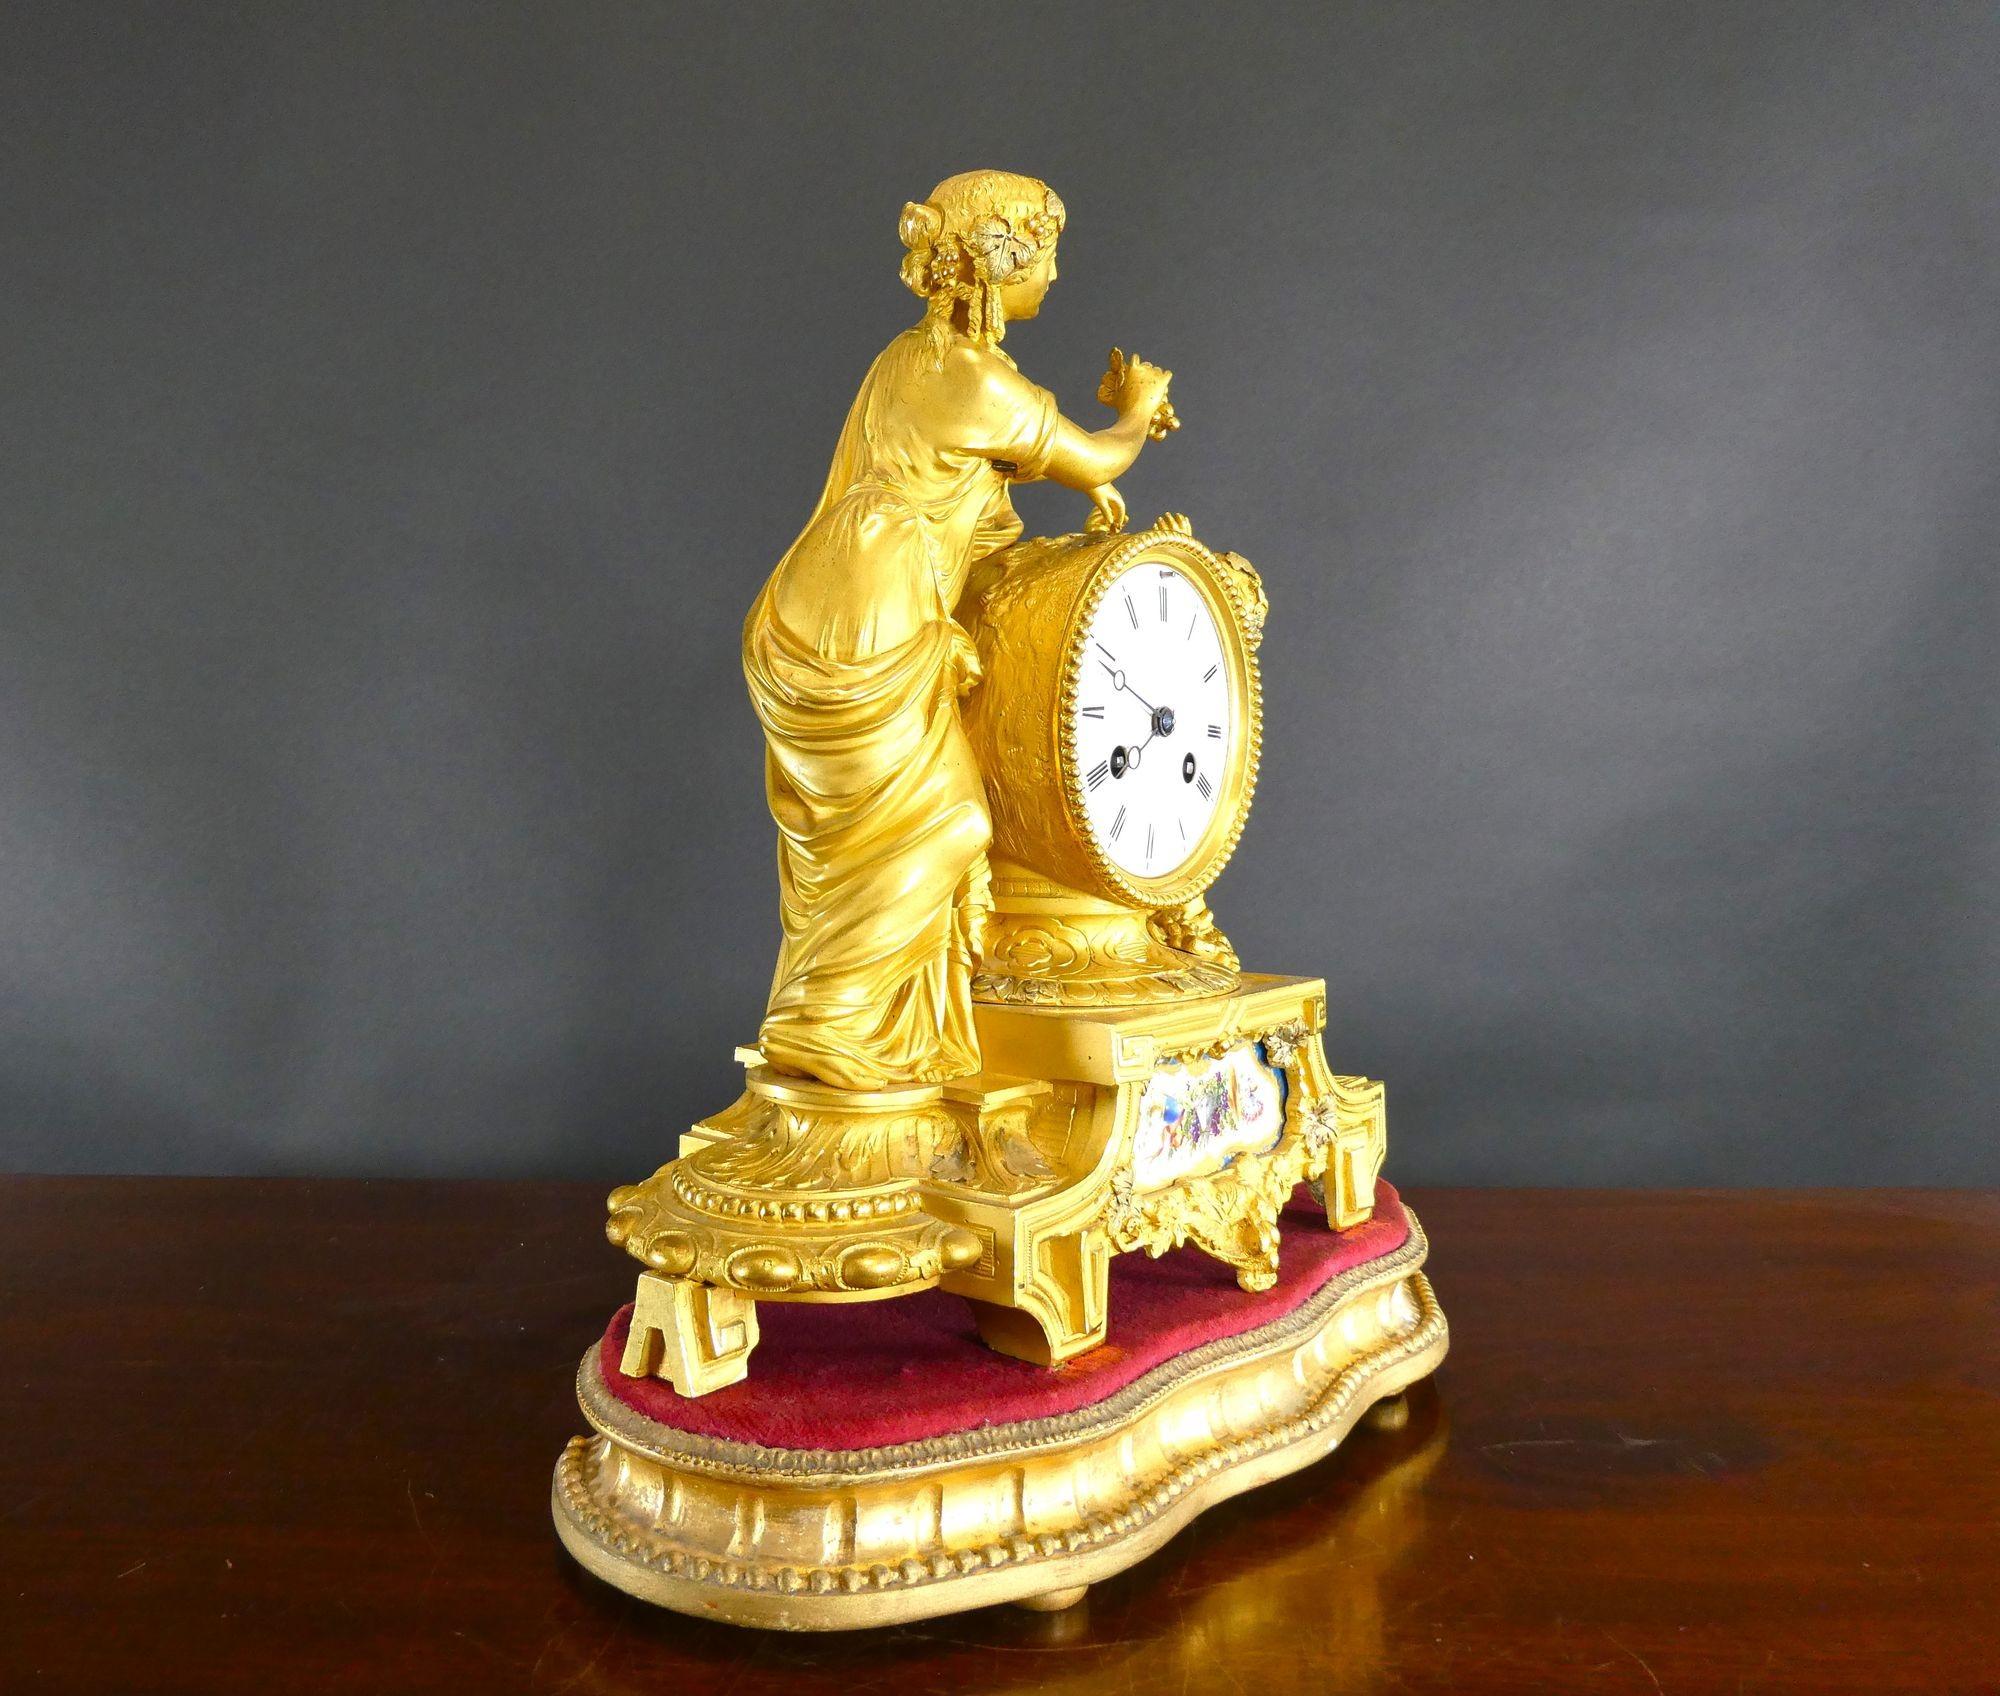 French Ormolu and Porcelain Panel Mantel Clock, A.B.Savory, Cornhill For Sale